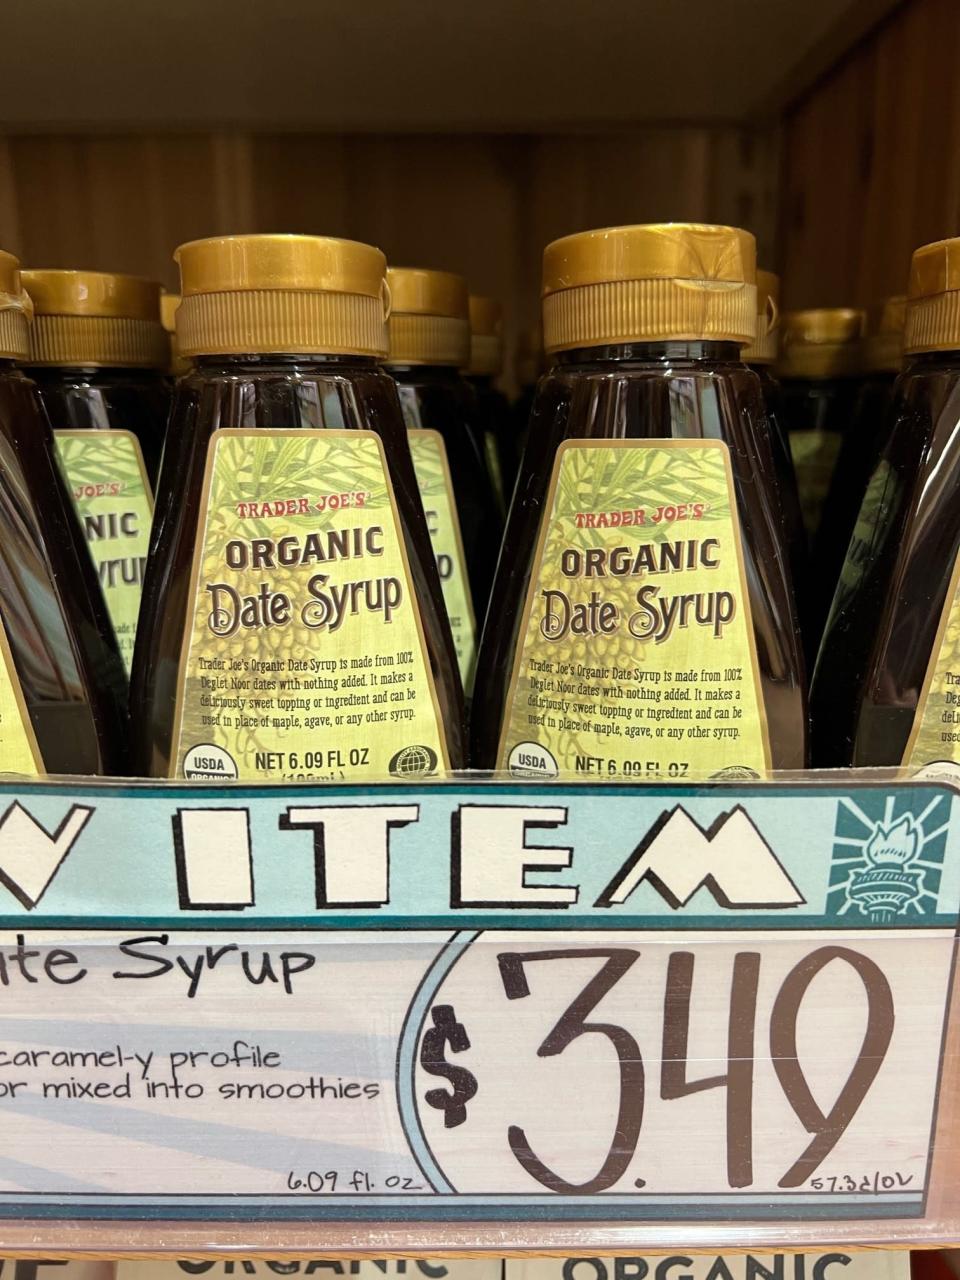 A bottle of&nbsp;Organic Date Syrup